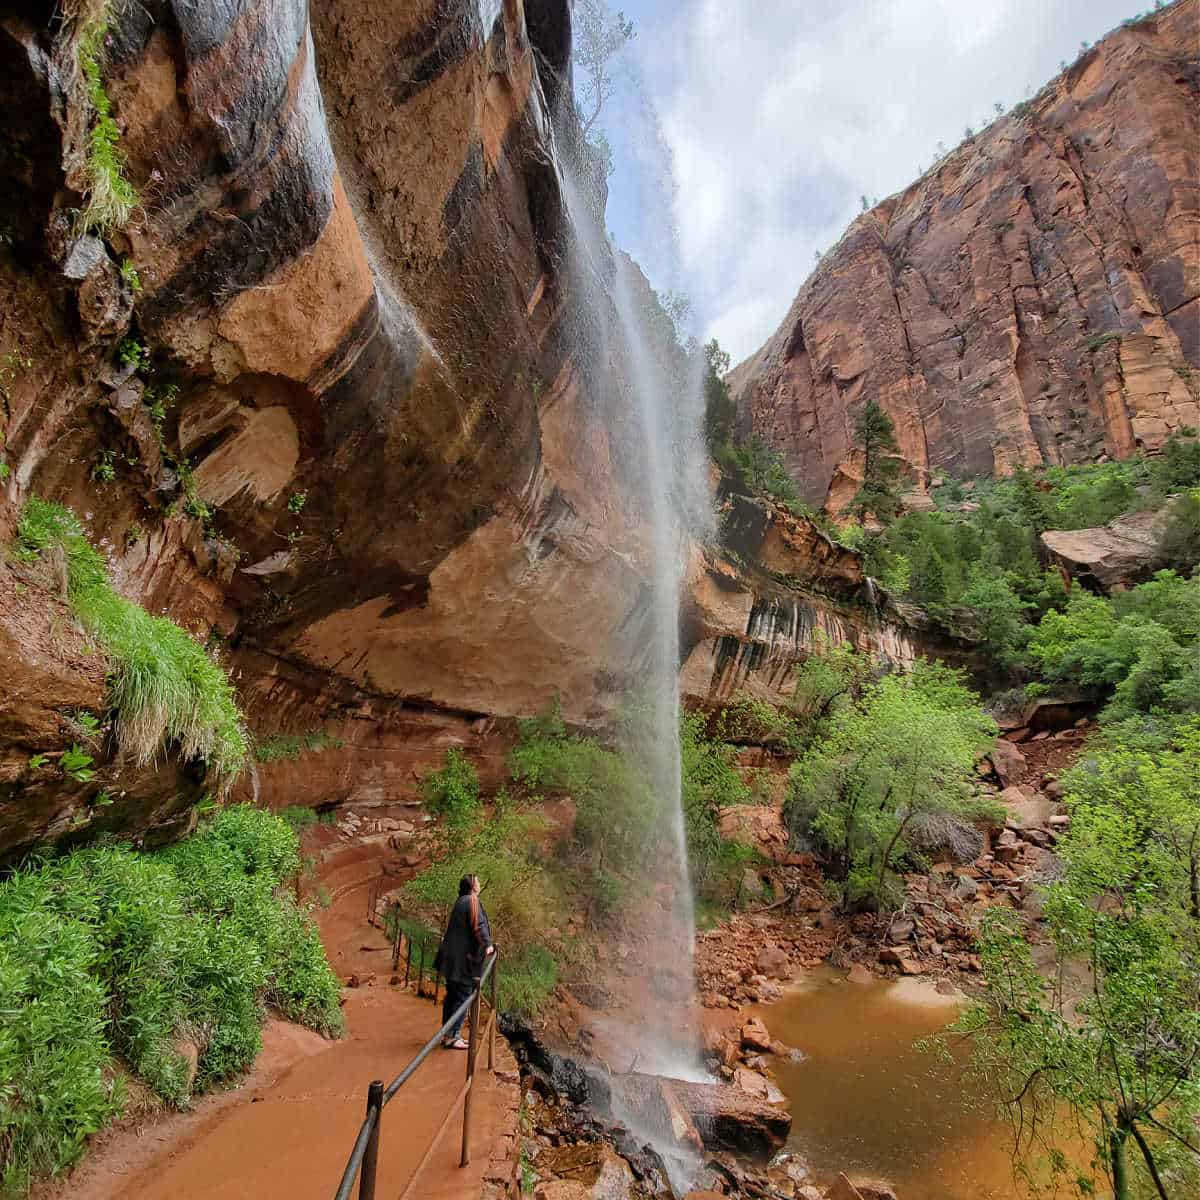 Waterfall into Lower Emerald Pool along the Emerald Pools Trail in Zion National Park